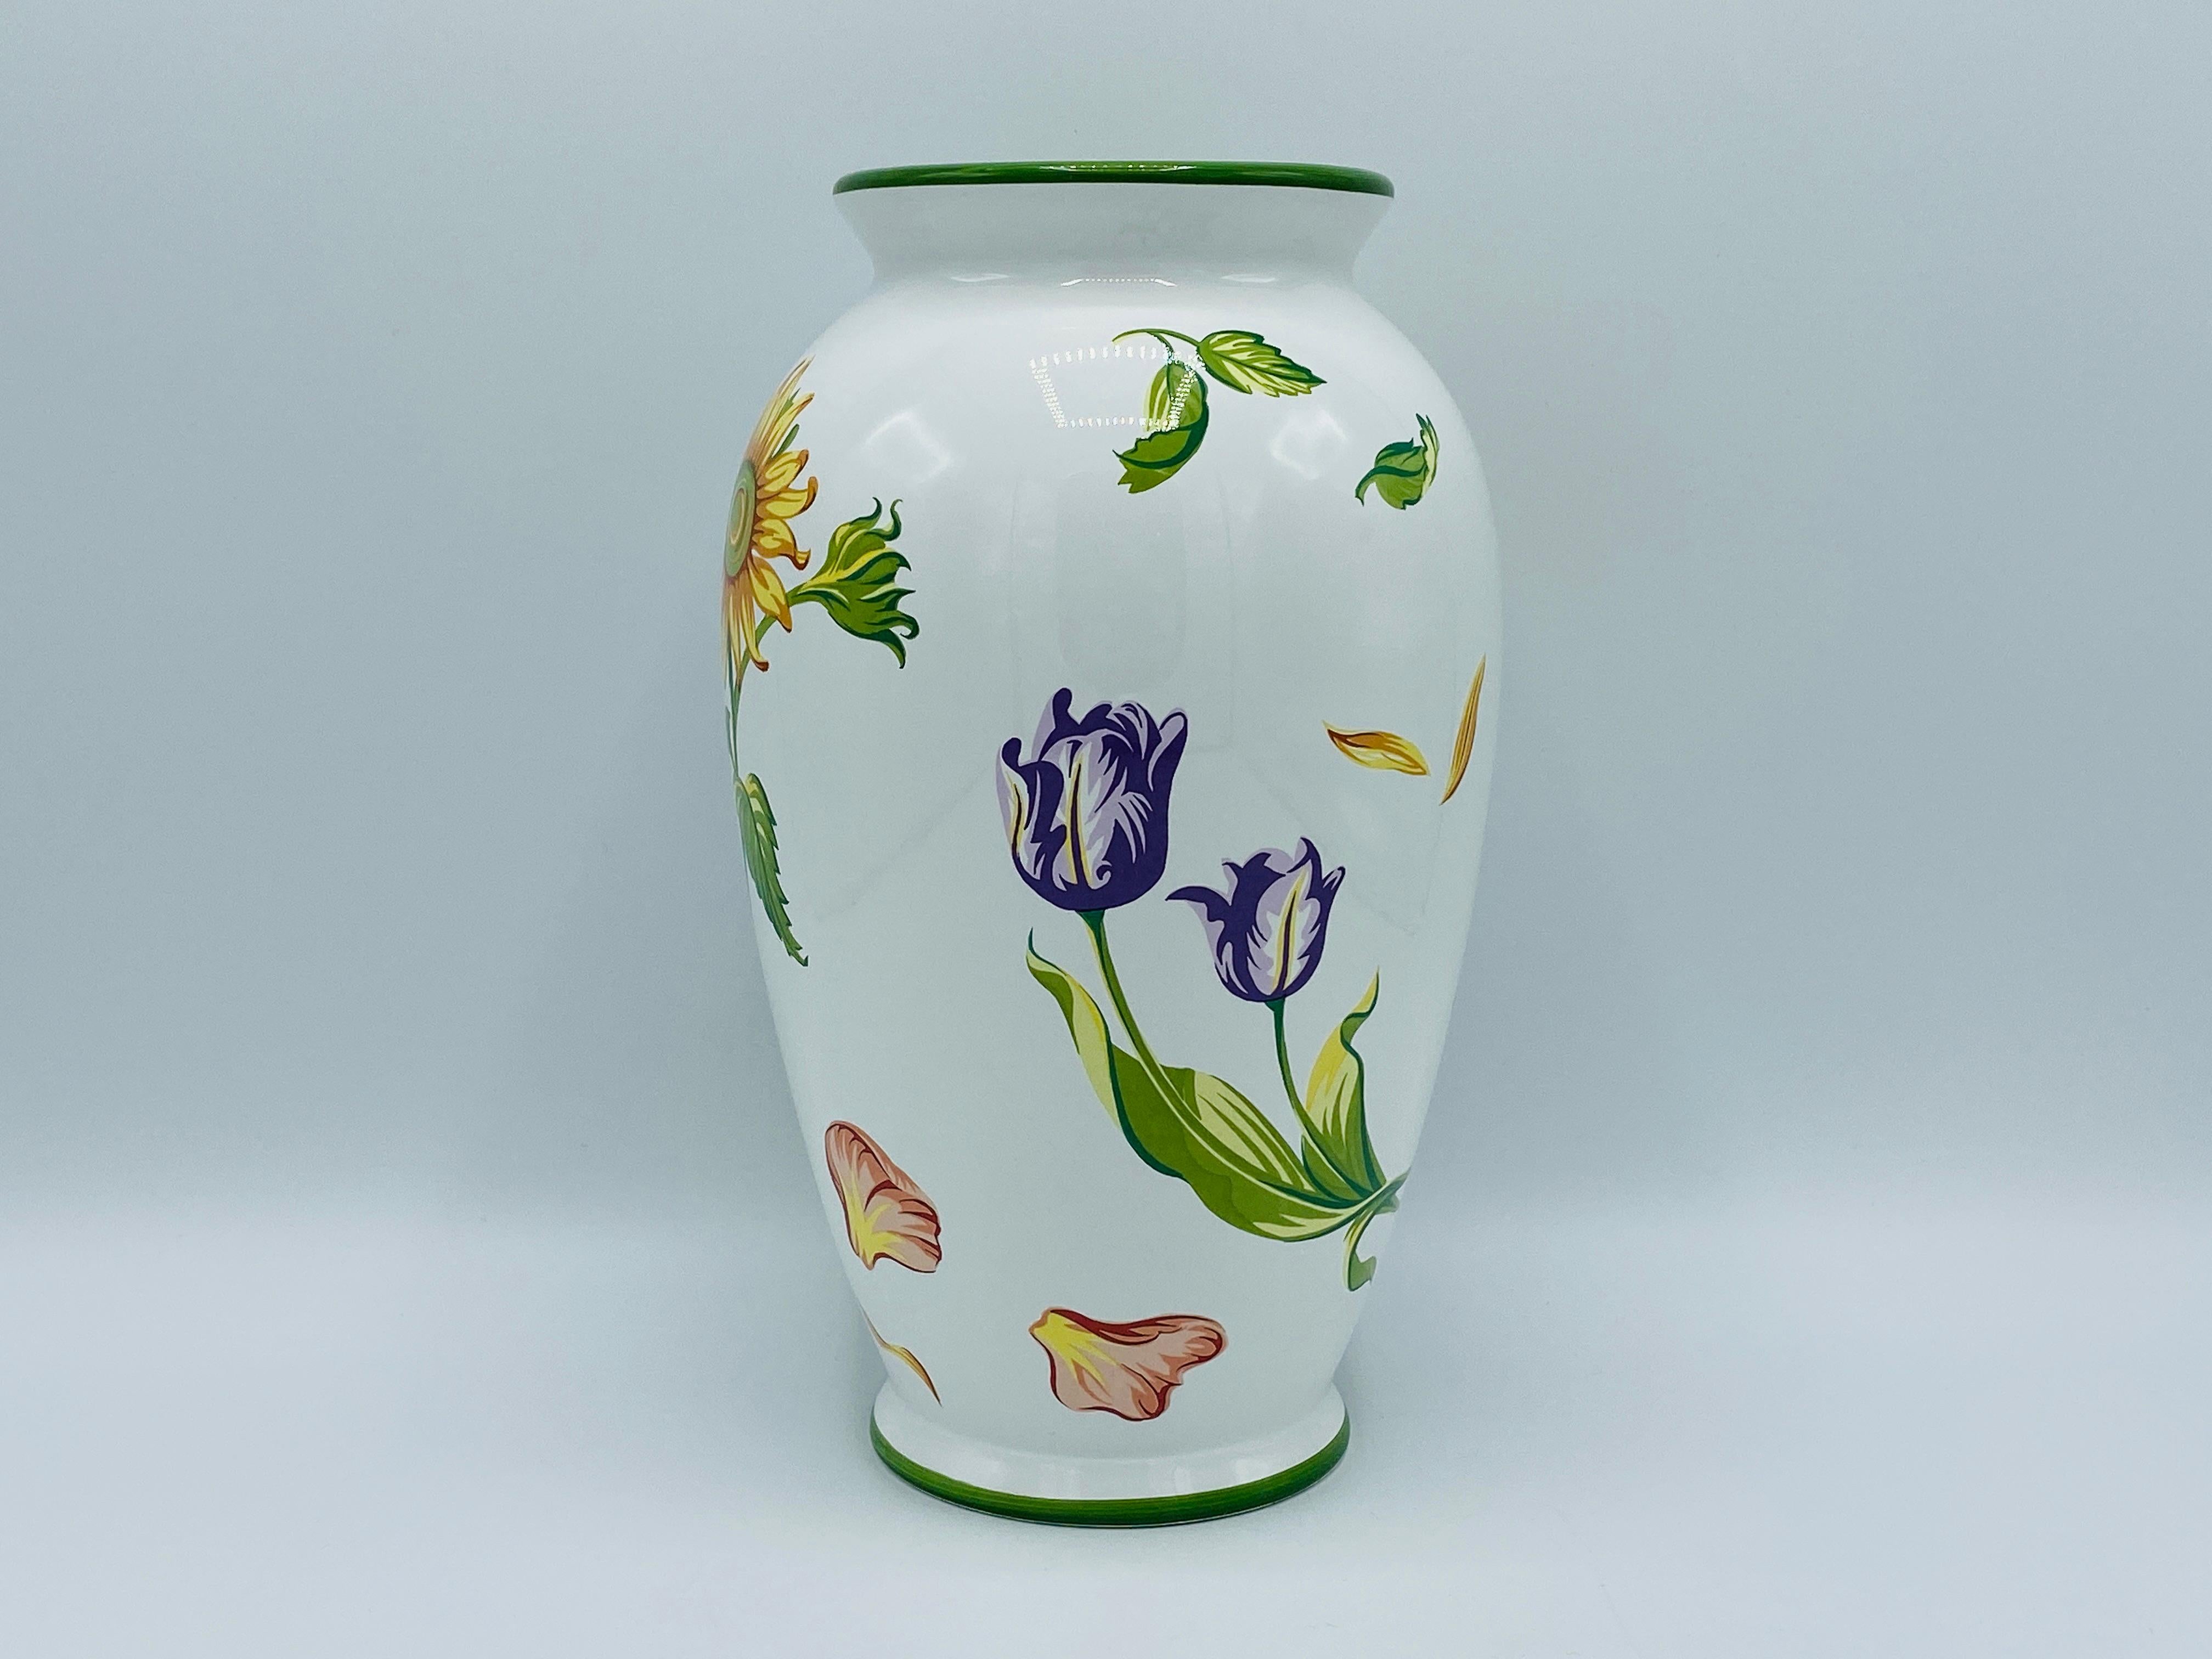 Listed is a collectible, Tiffany & Co. ceramic 'Tiffany Petals' vase, circa 1998. Hand painted with sunflower, rose petal, and tulip motifs. Made in Portugal. Marked on underside. Heavy, weighing 2.6lbs.